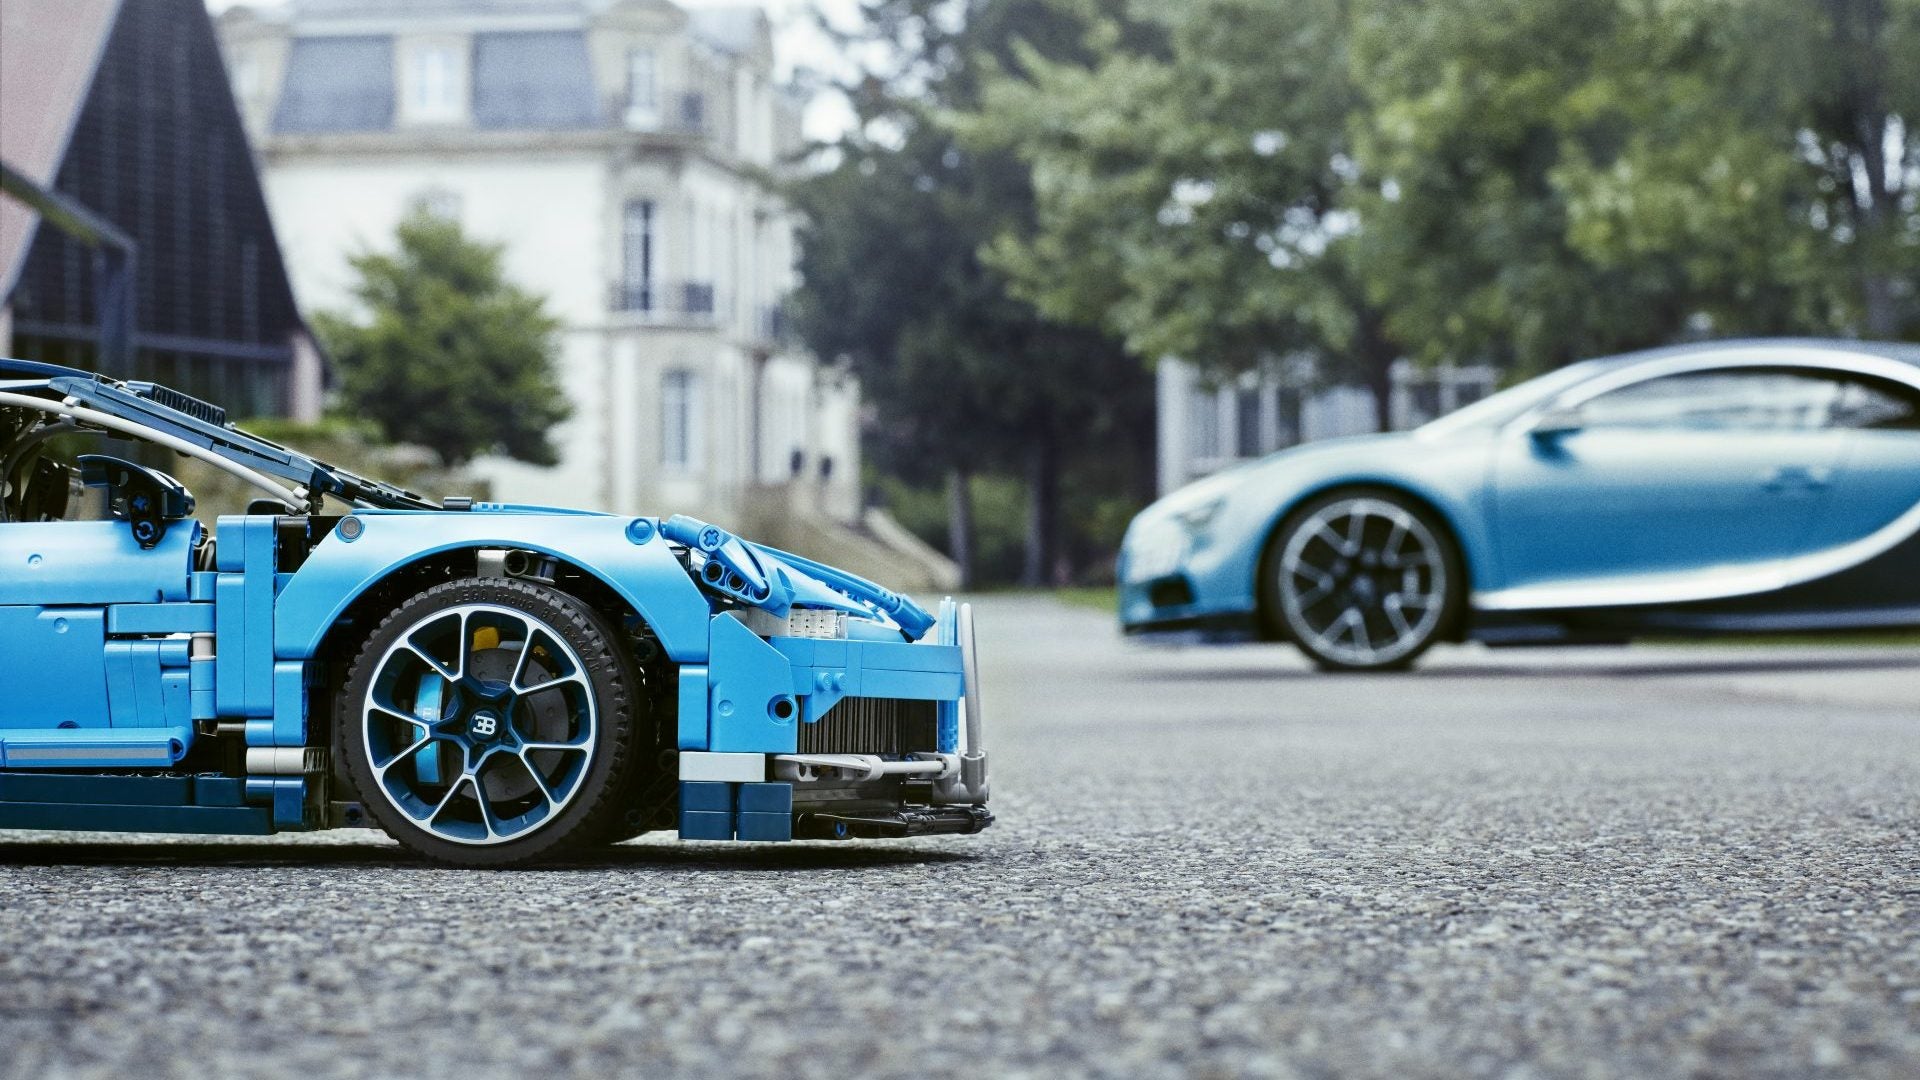 You Can Now Build a Bugatti Chiron With This 3,599-Piece Lego Set